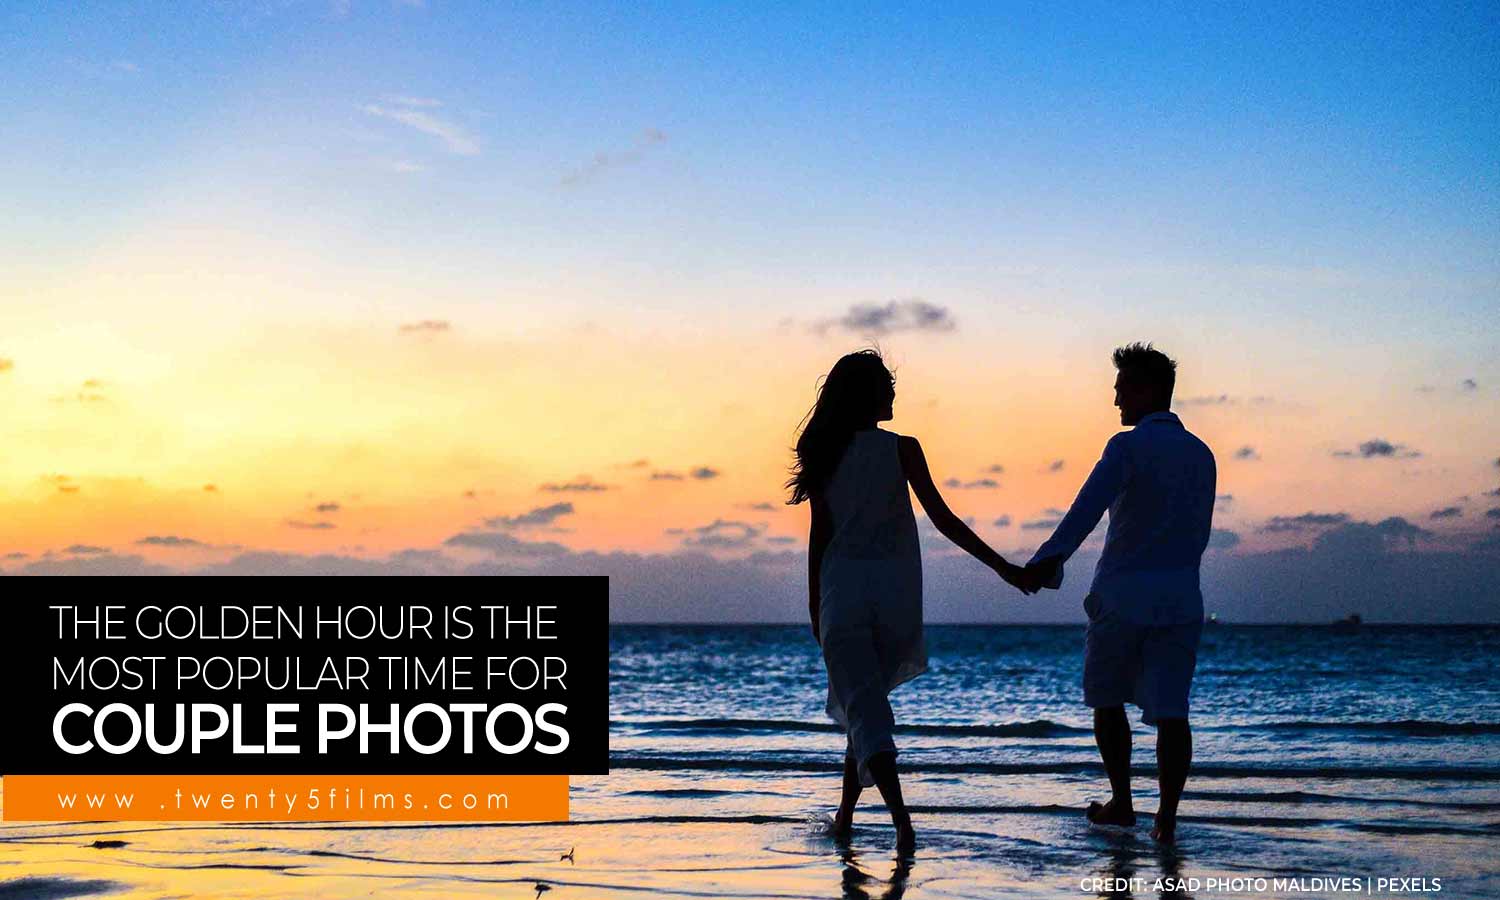 golden-hour-is-the-most-popular-time-for-couple-photos